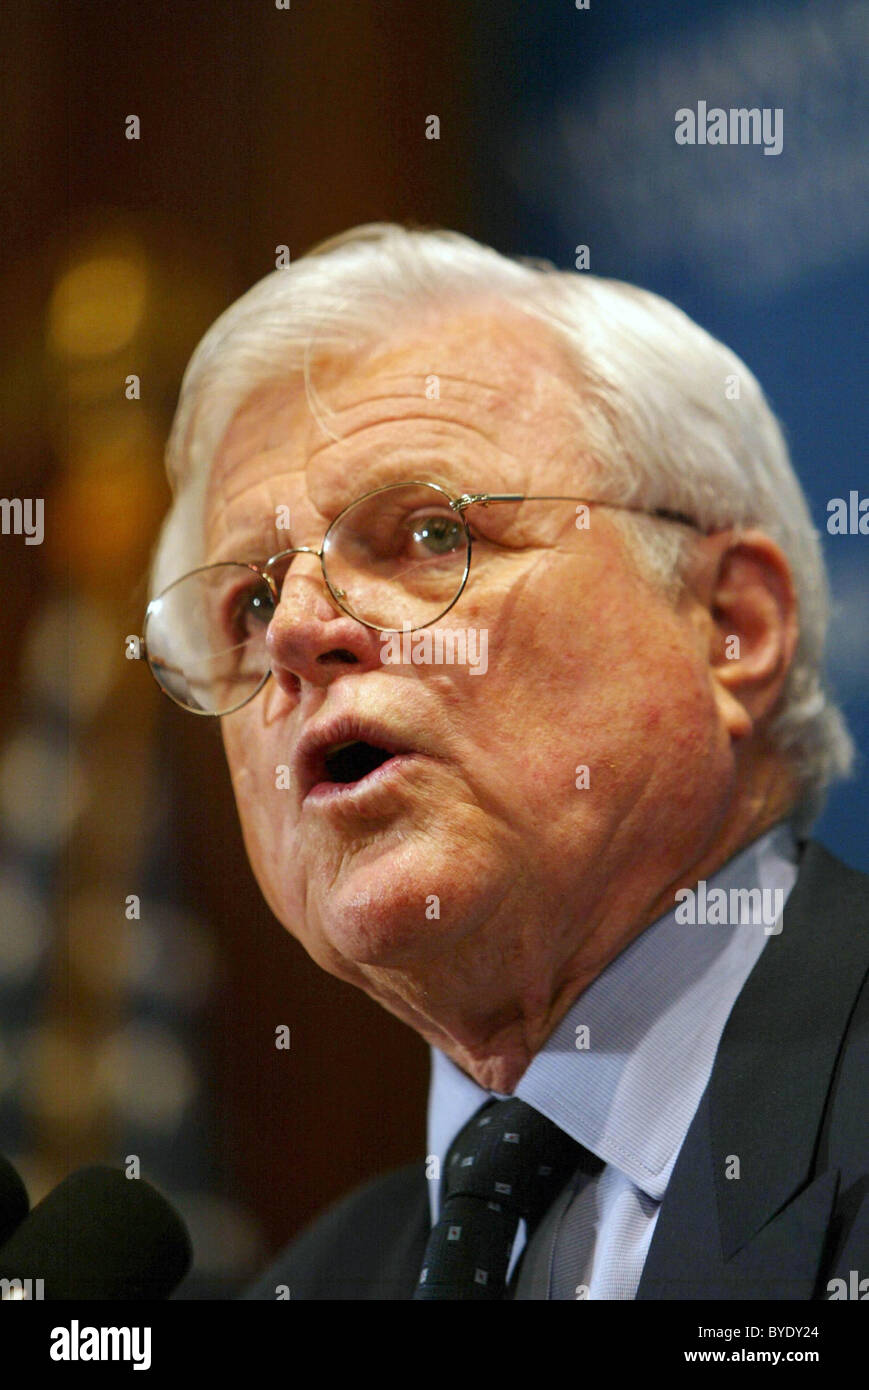 Senator Edward 'Ted' Kennedy speaking about the health care agenda for the 110th Congress at The National Press Club His staff Stock Photo